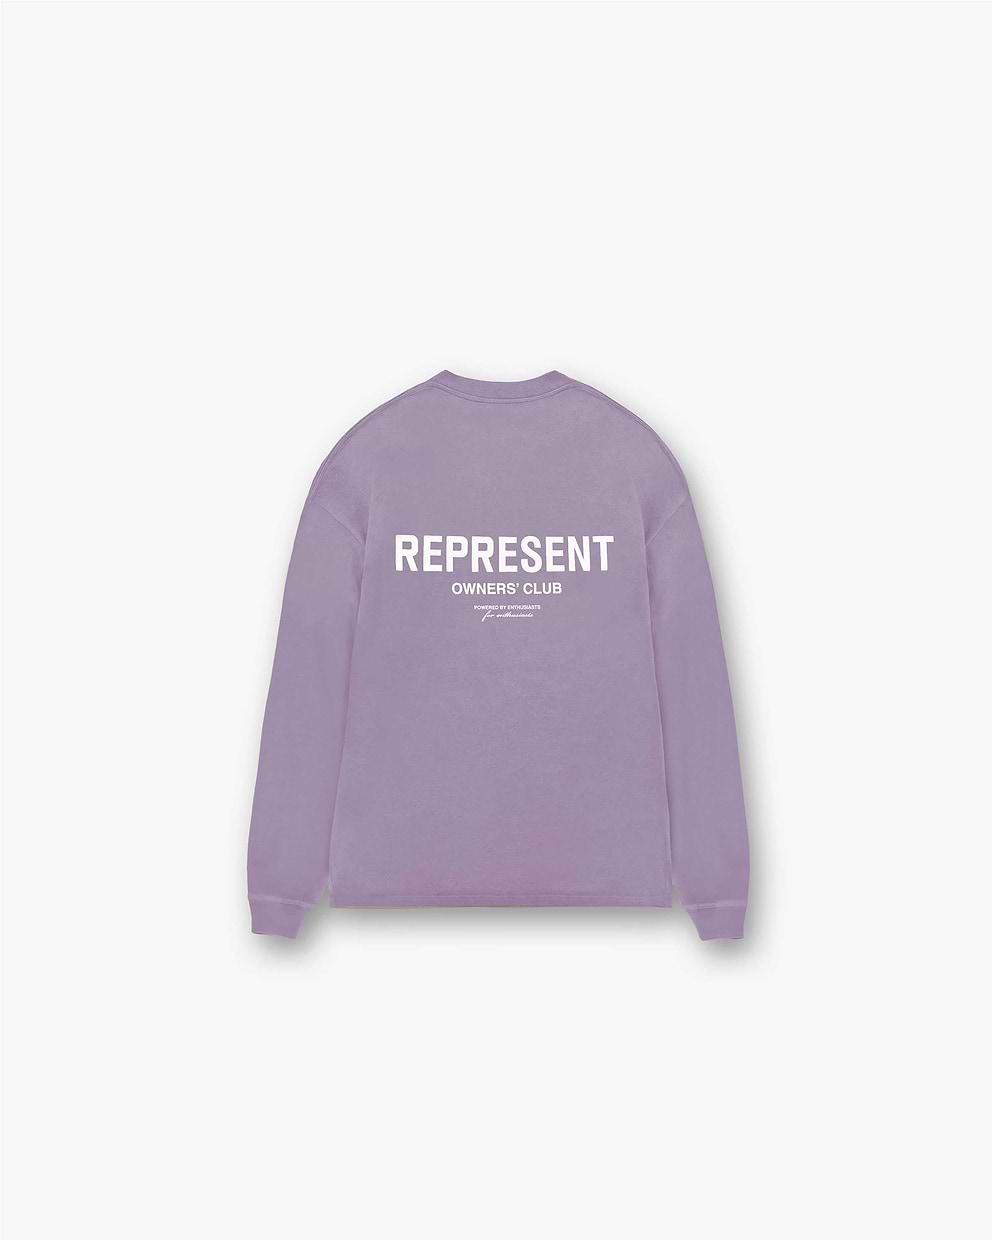 Represent Owners Club Long Sleeve T-Shirt - Vintage Violet